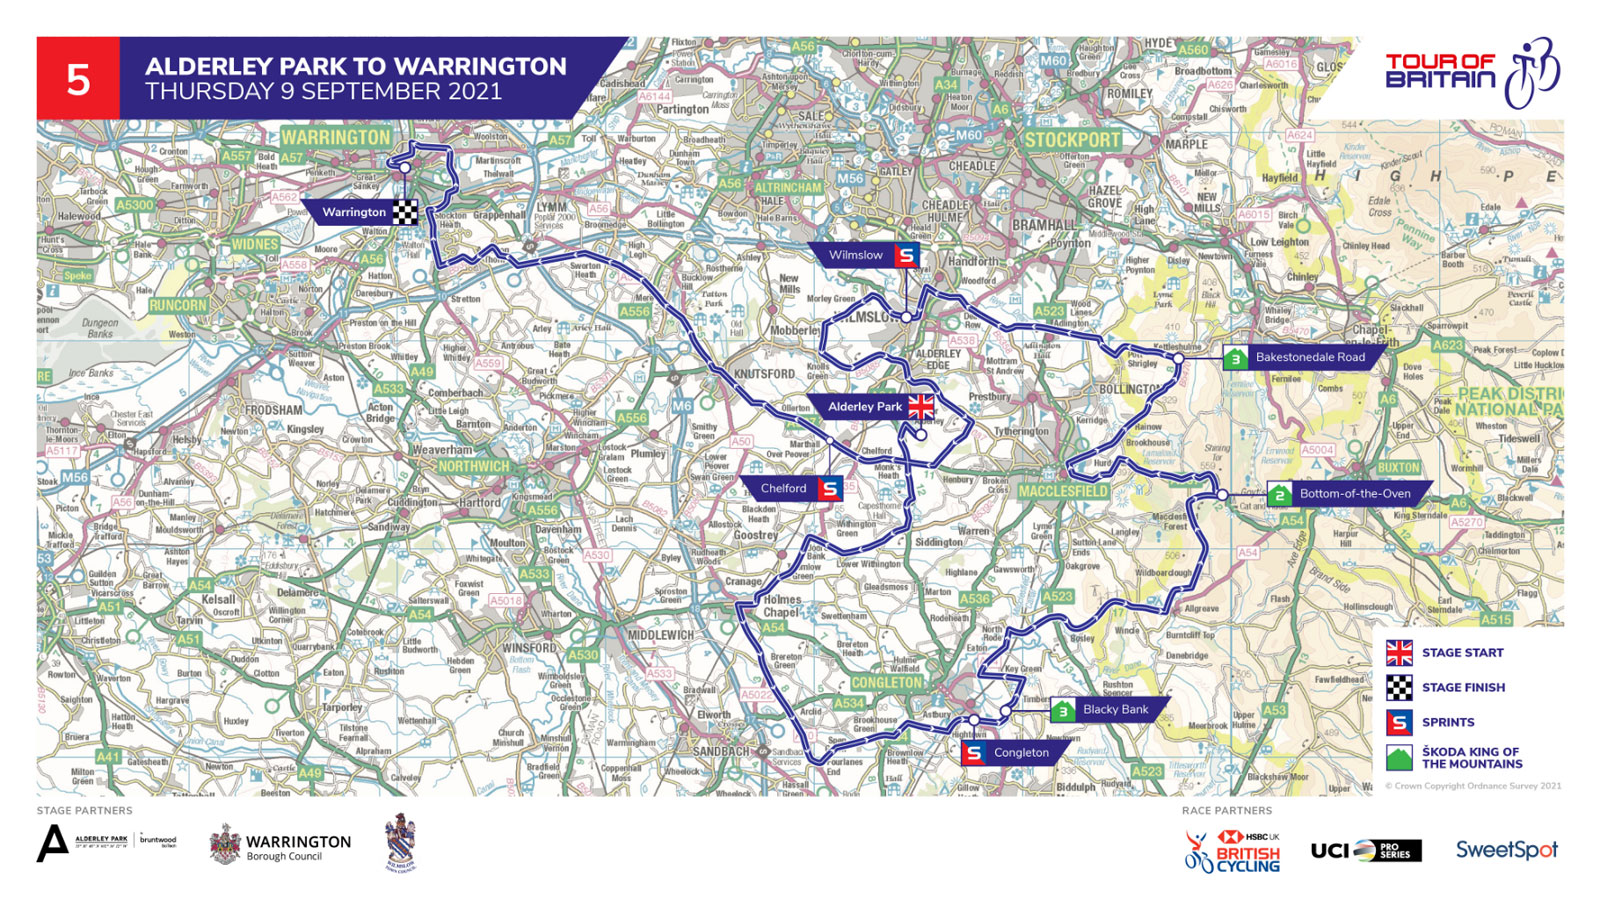 Tour of Britain returning to Cheshire's famous Peak District climbs